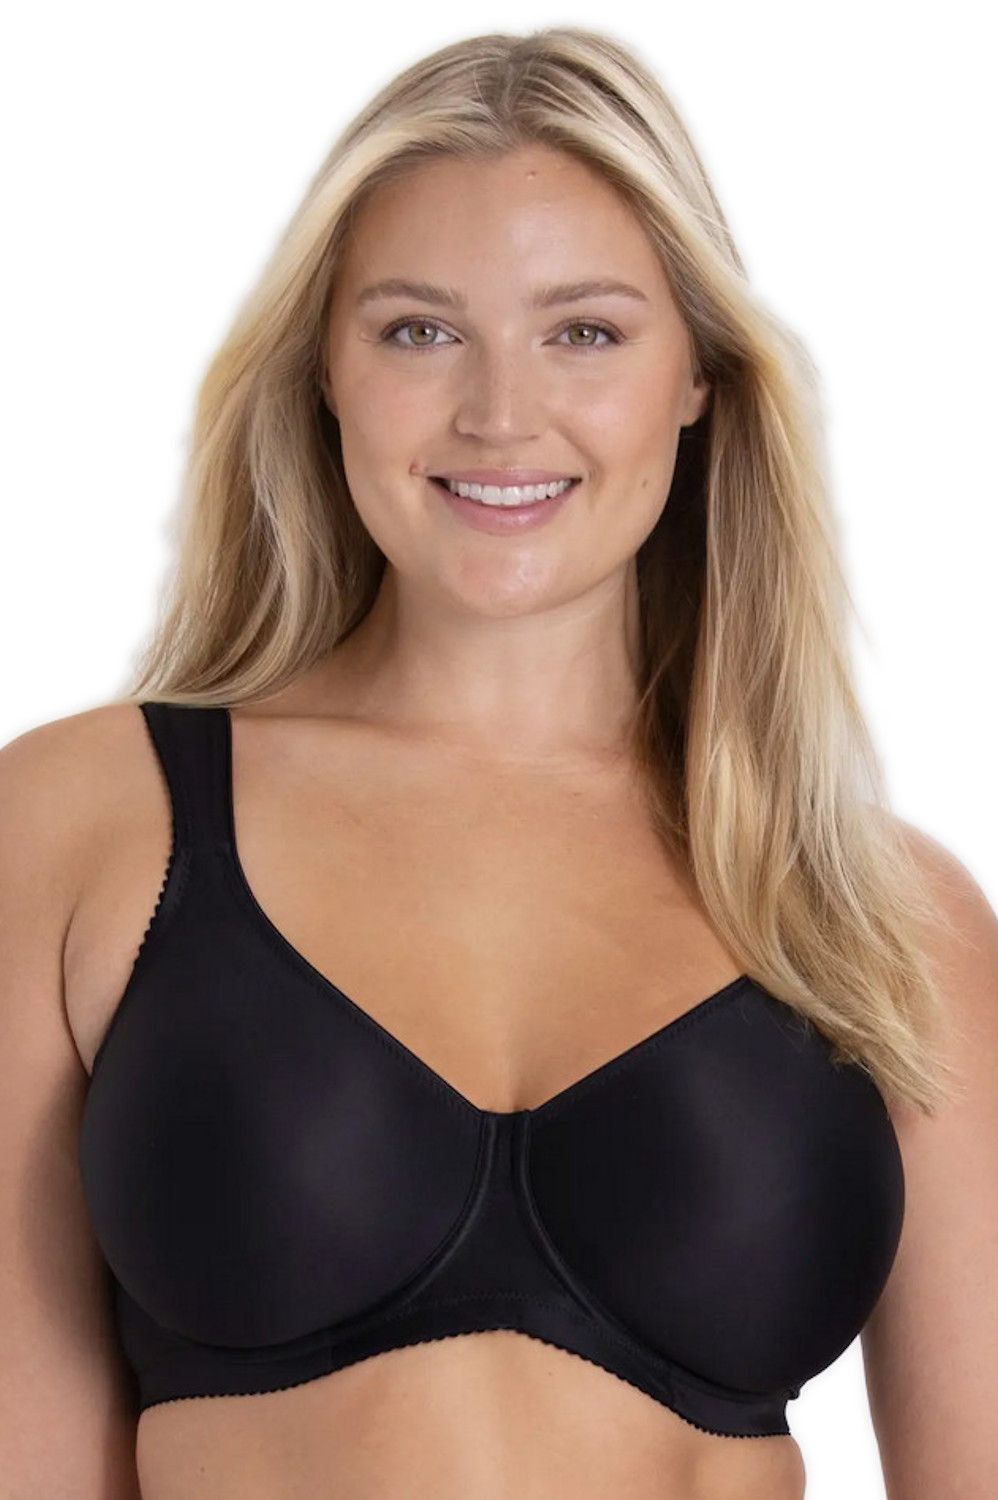 YITTY Bra New Black Size M - $26 (56% Off Retail) New With Tags - From Mara